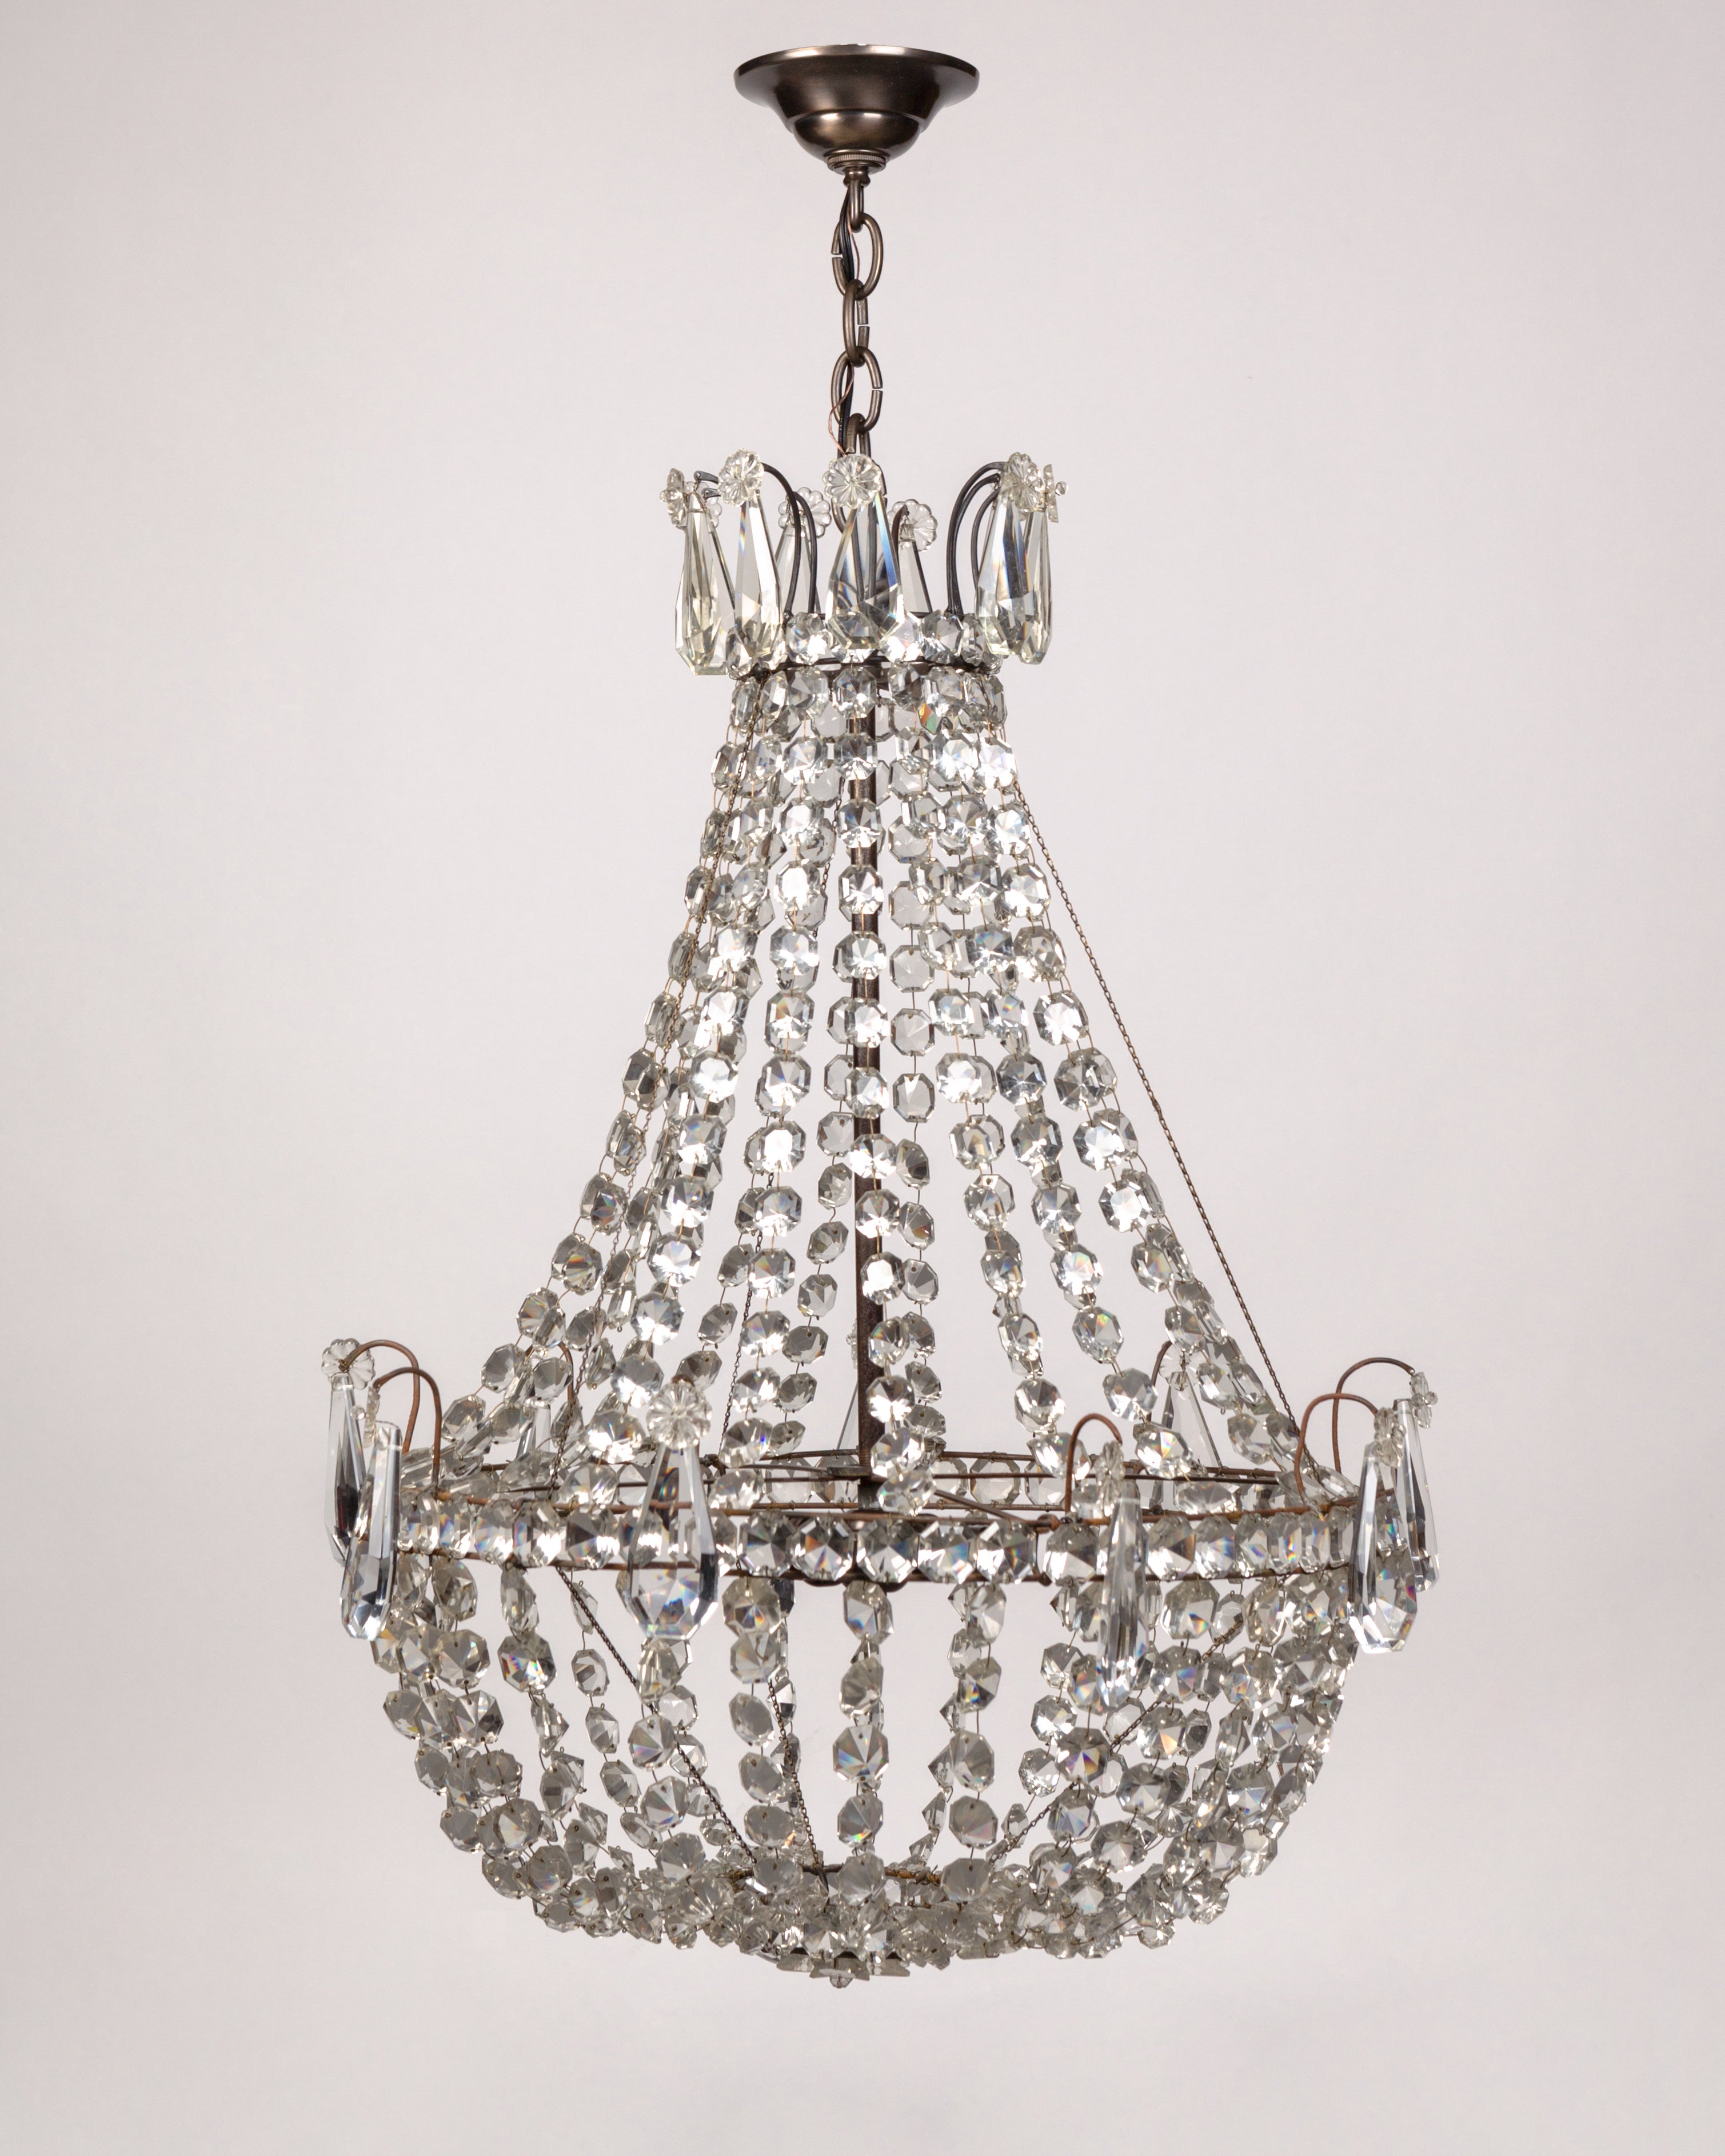 A beaded crystal chandelier